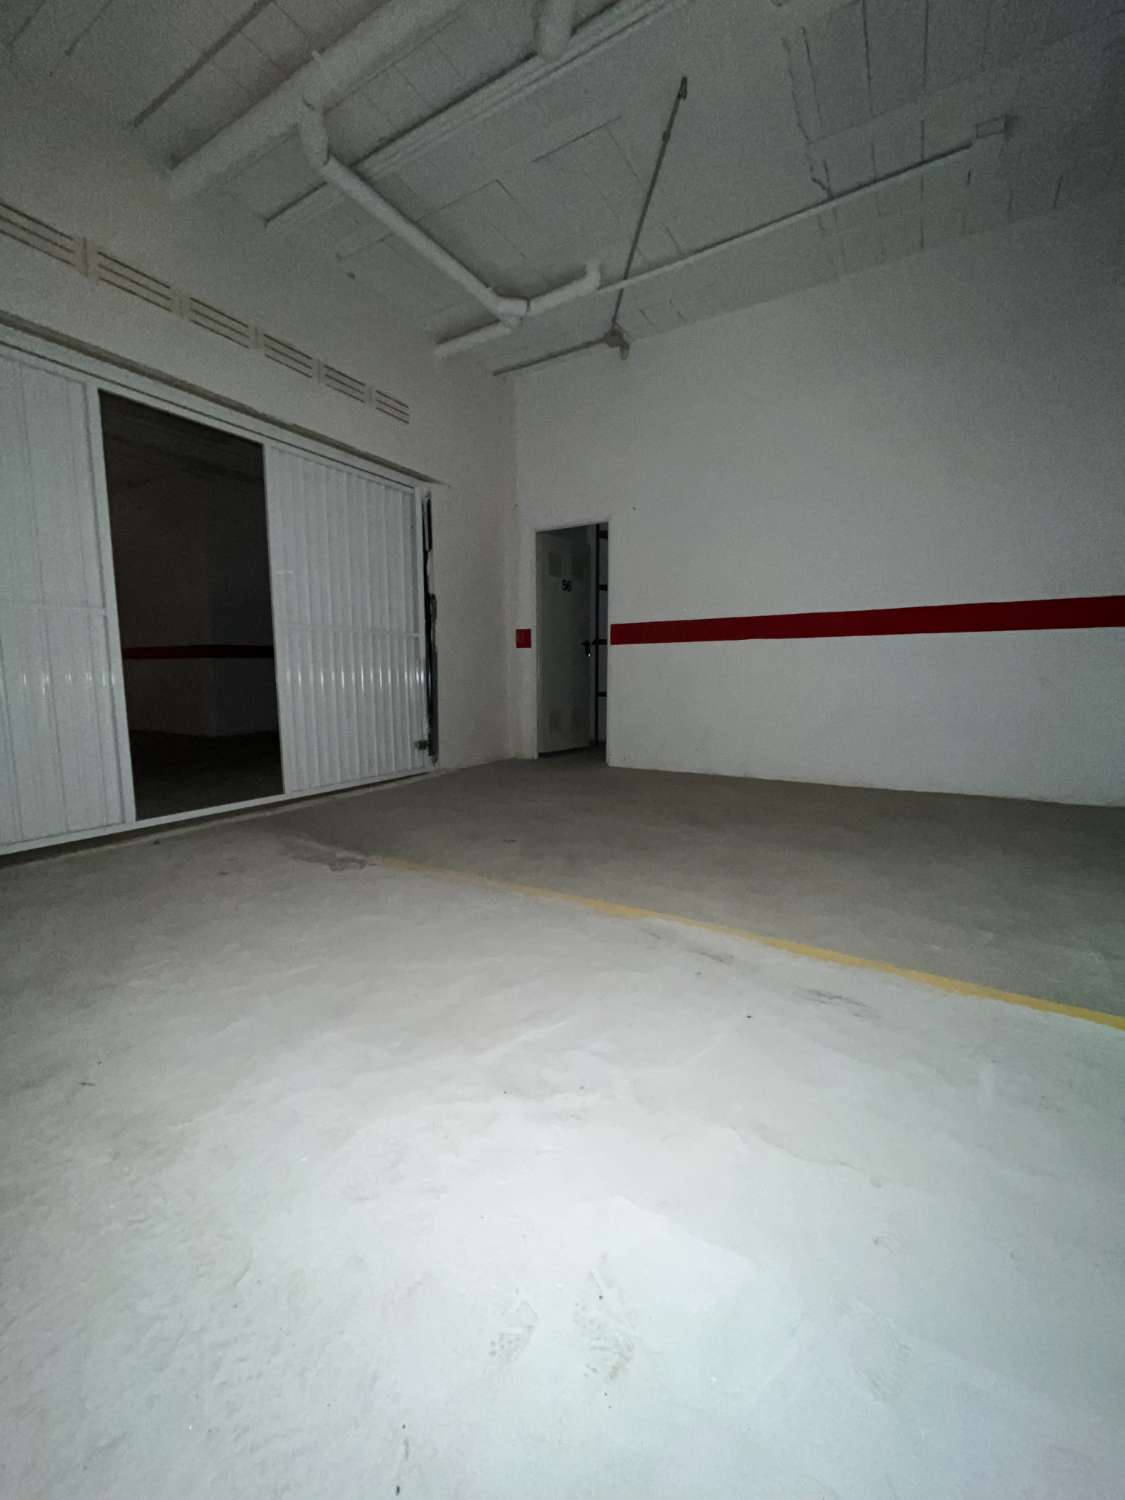 Large closed garage for 2 cars with storage room